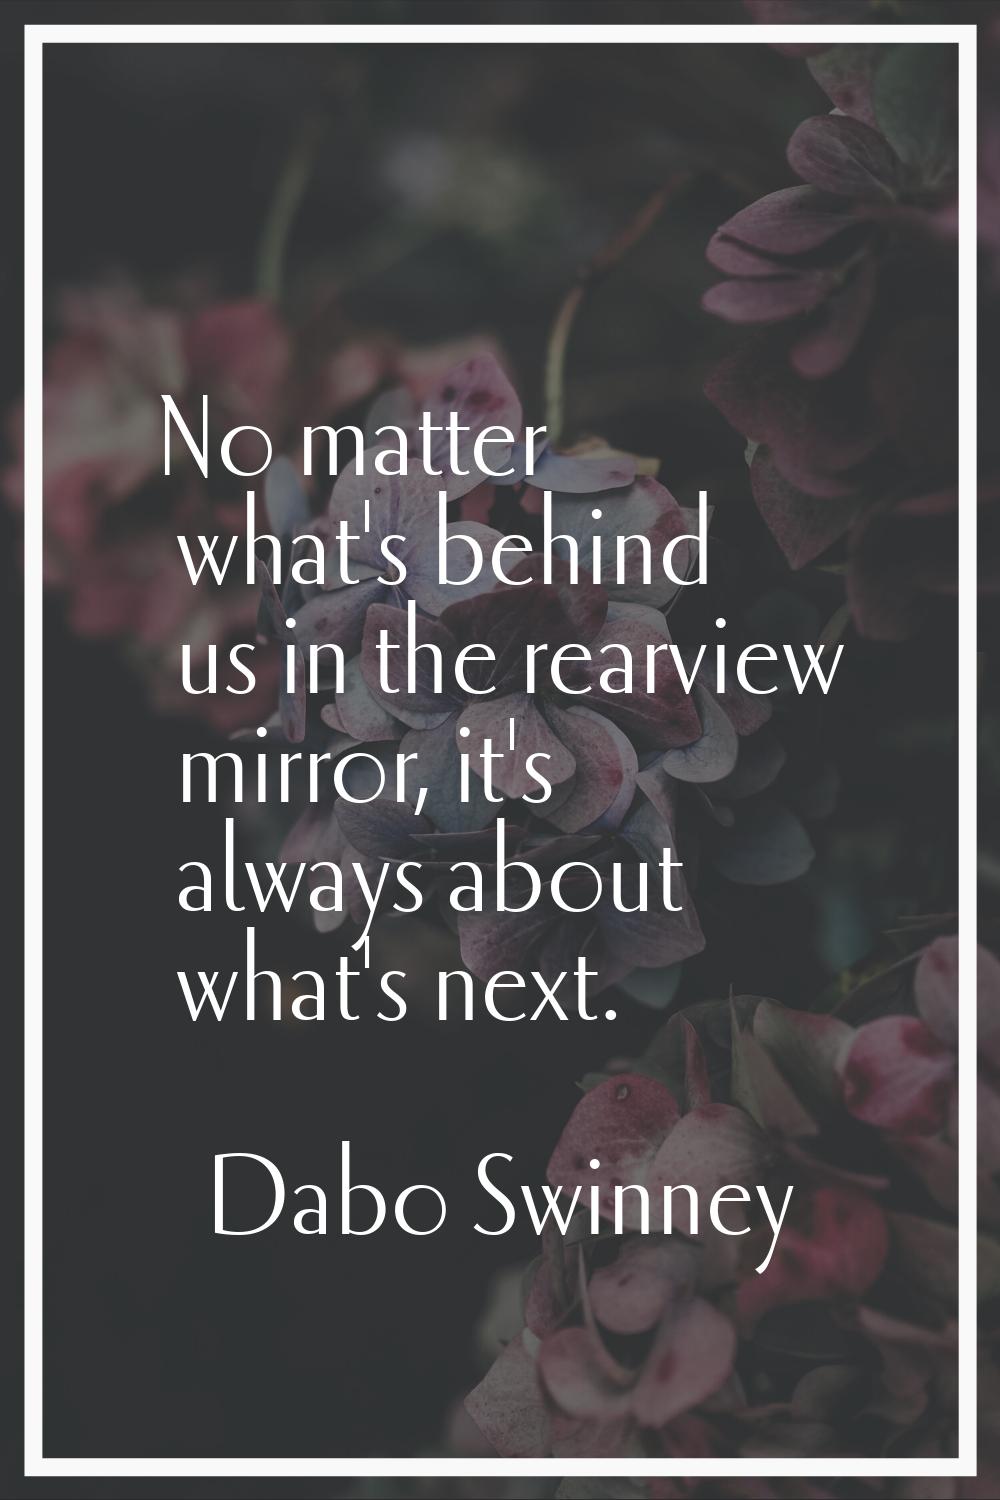 No matter what's behind us in the rearview mirror, it's always about what's next.